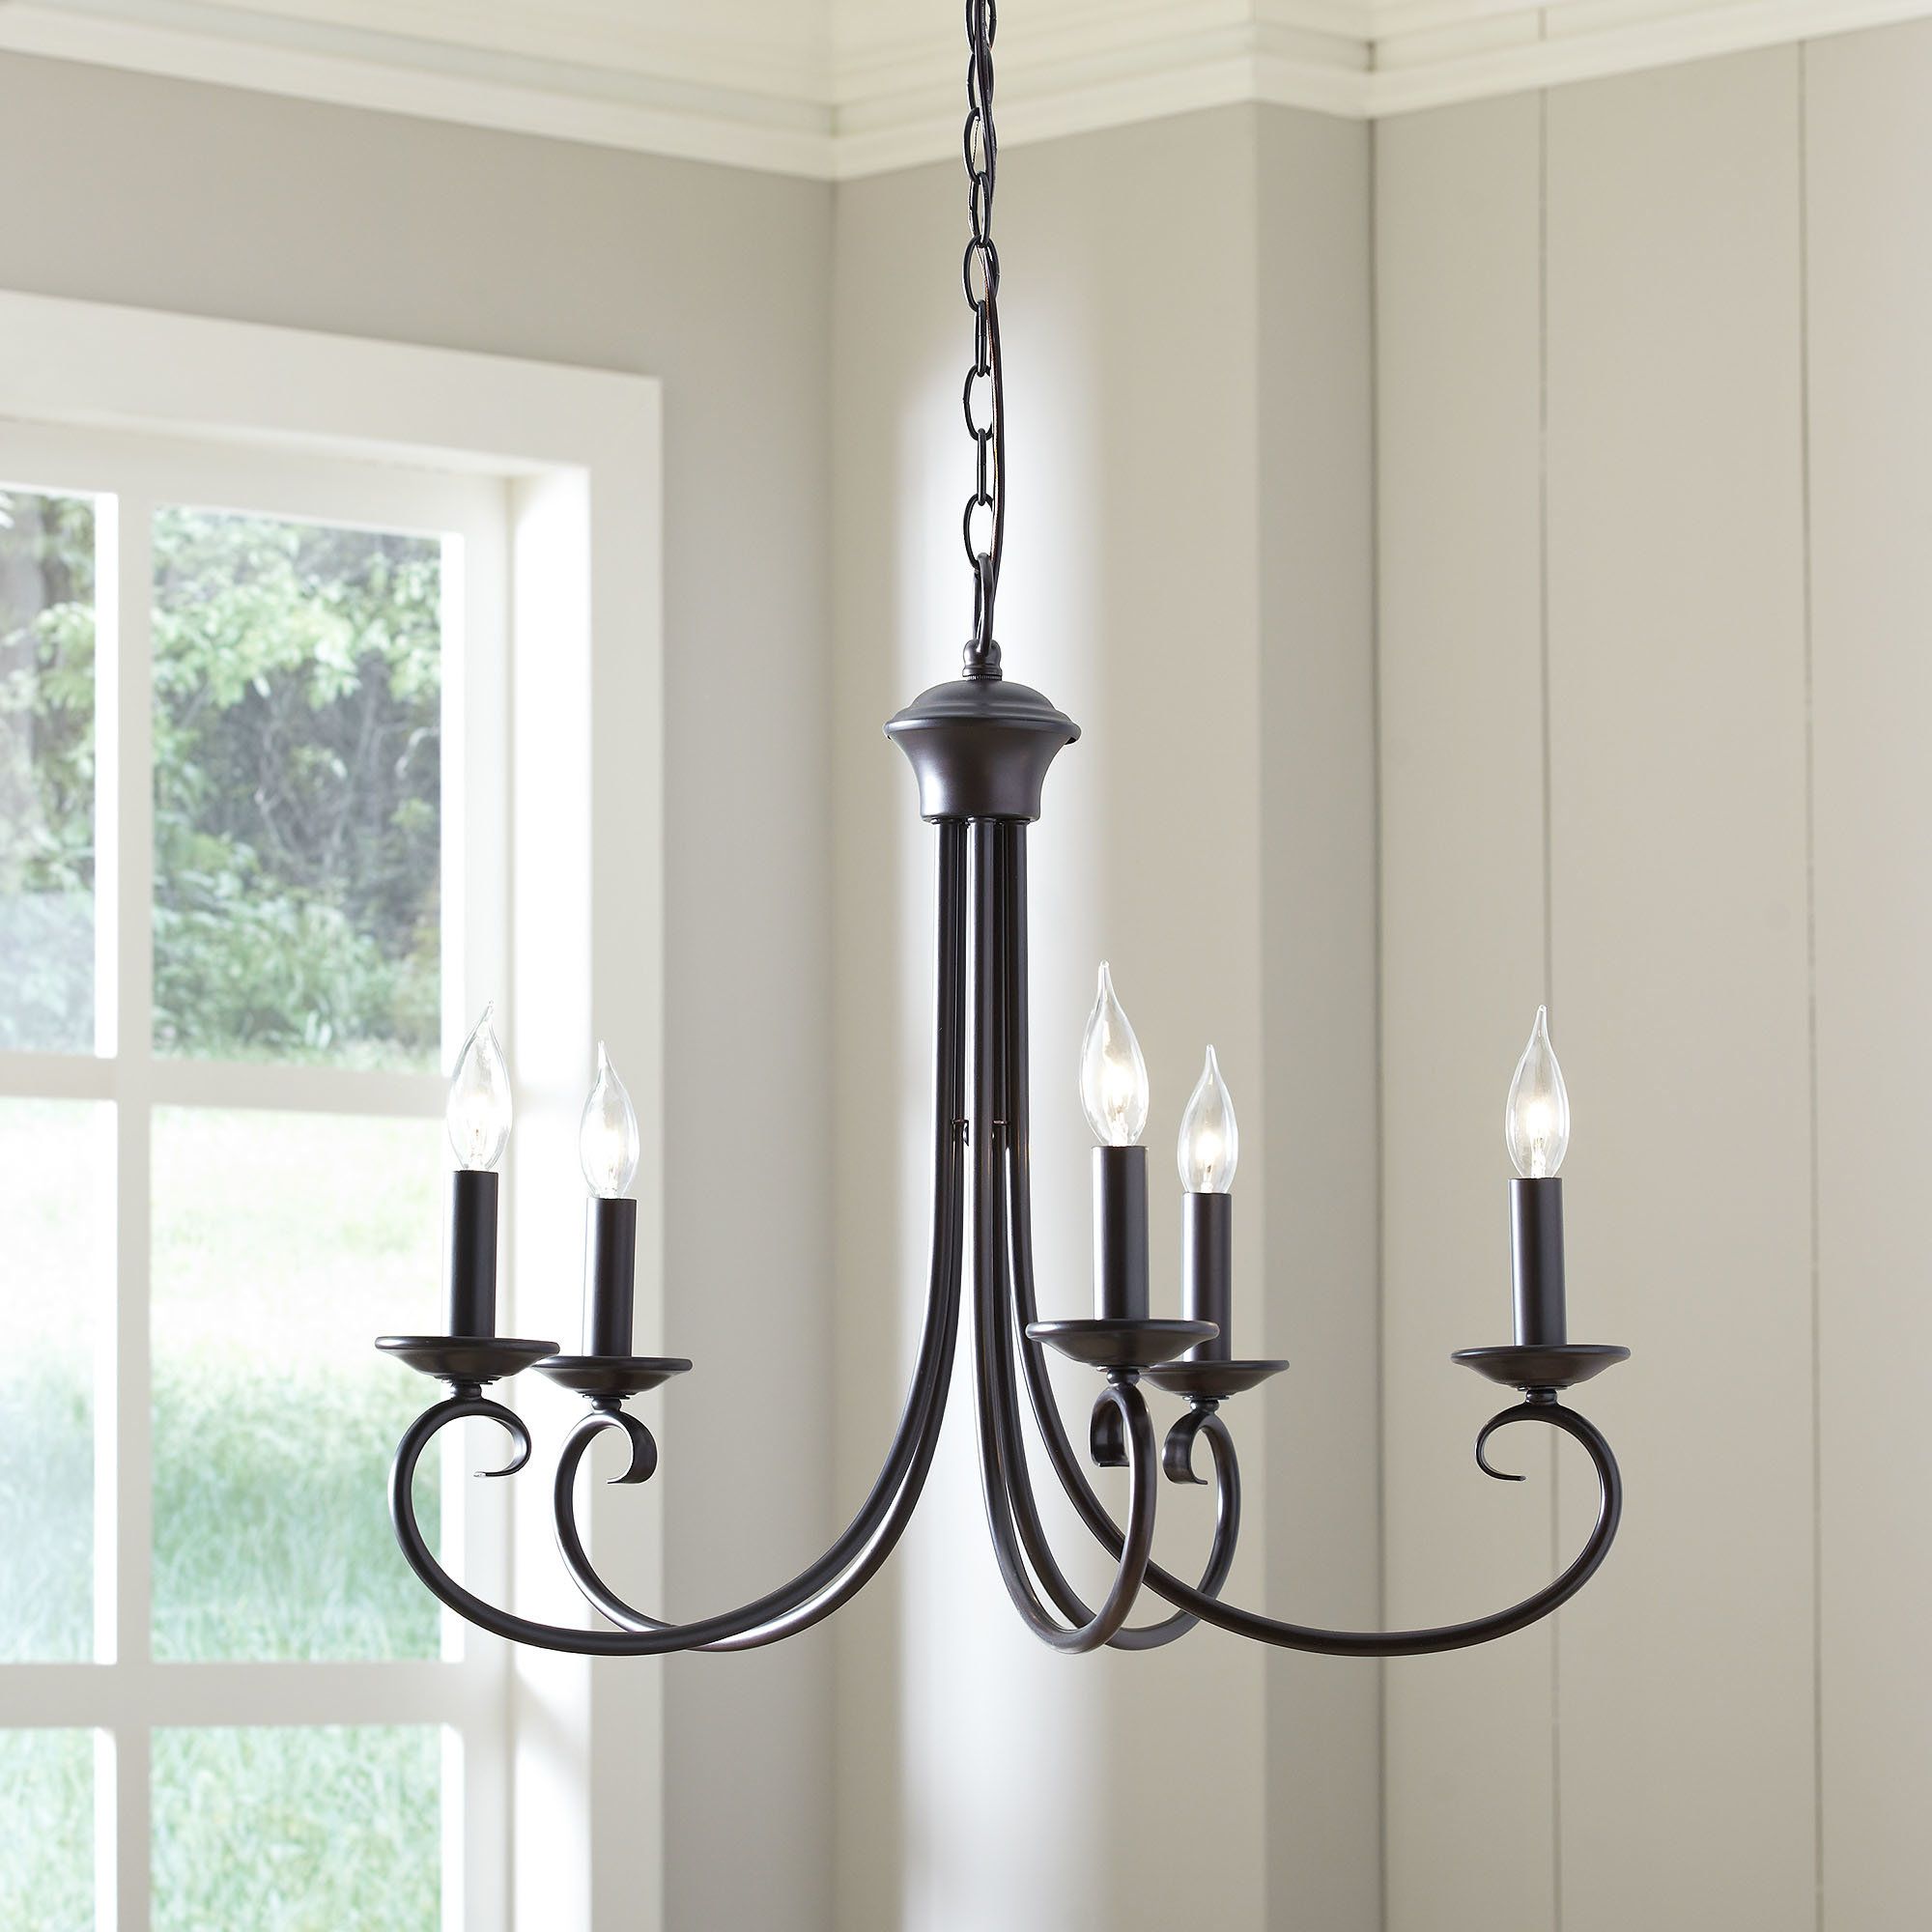 Edgell 5 Light Candle Style Chandelier Pertaining To Shaylee 8 Light Candle Style Chandeliers (View 14 of 30)